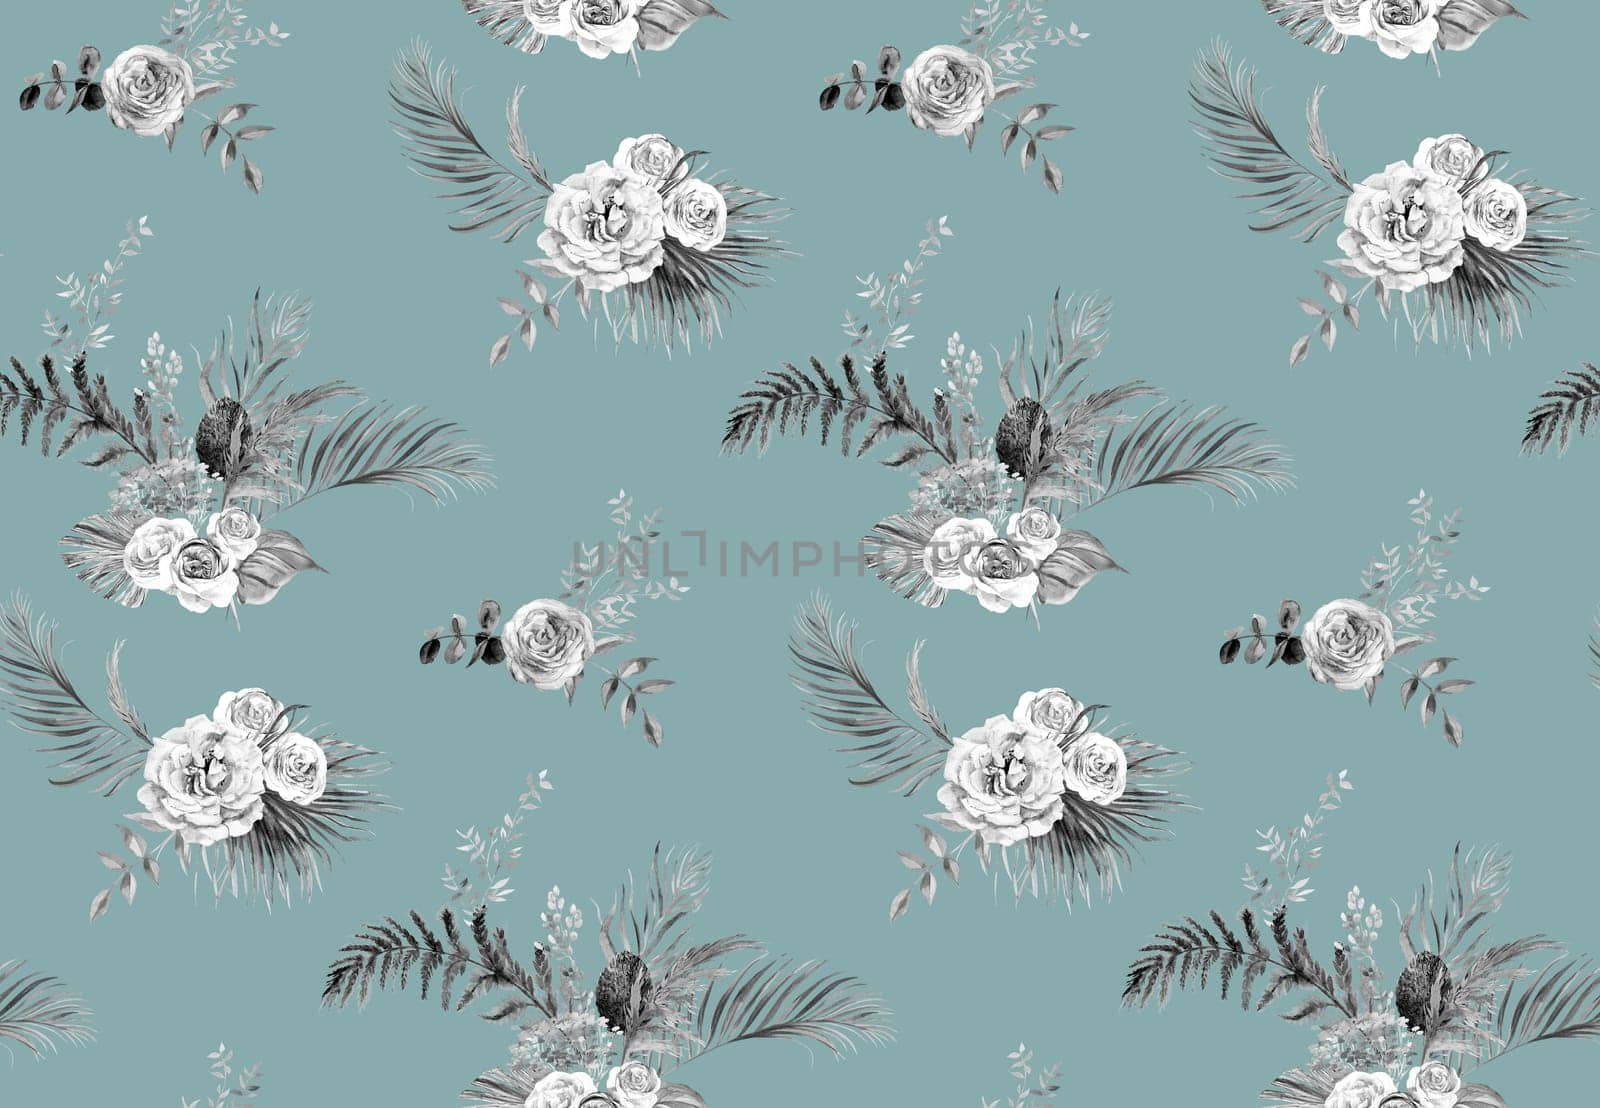 Watercolor seamless botanical monochrome pattern with dry palm leaves and roses and dried flowers on a turquoise background for textile and surface design